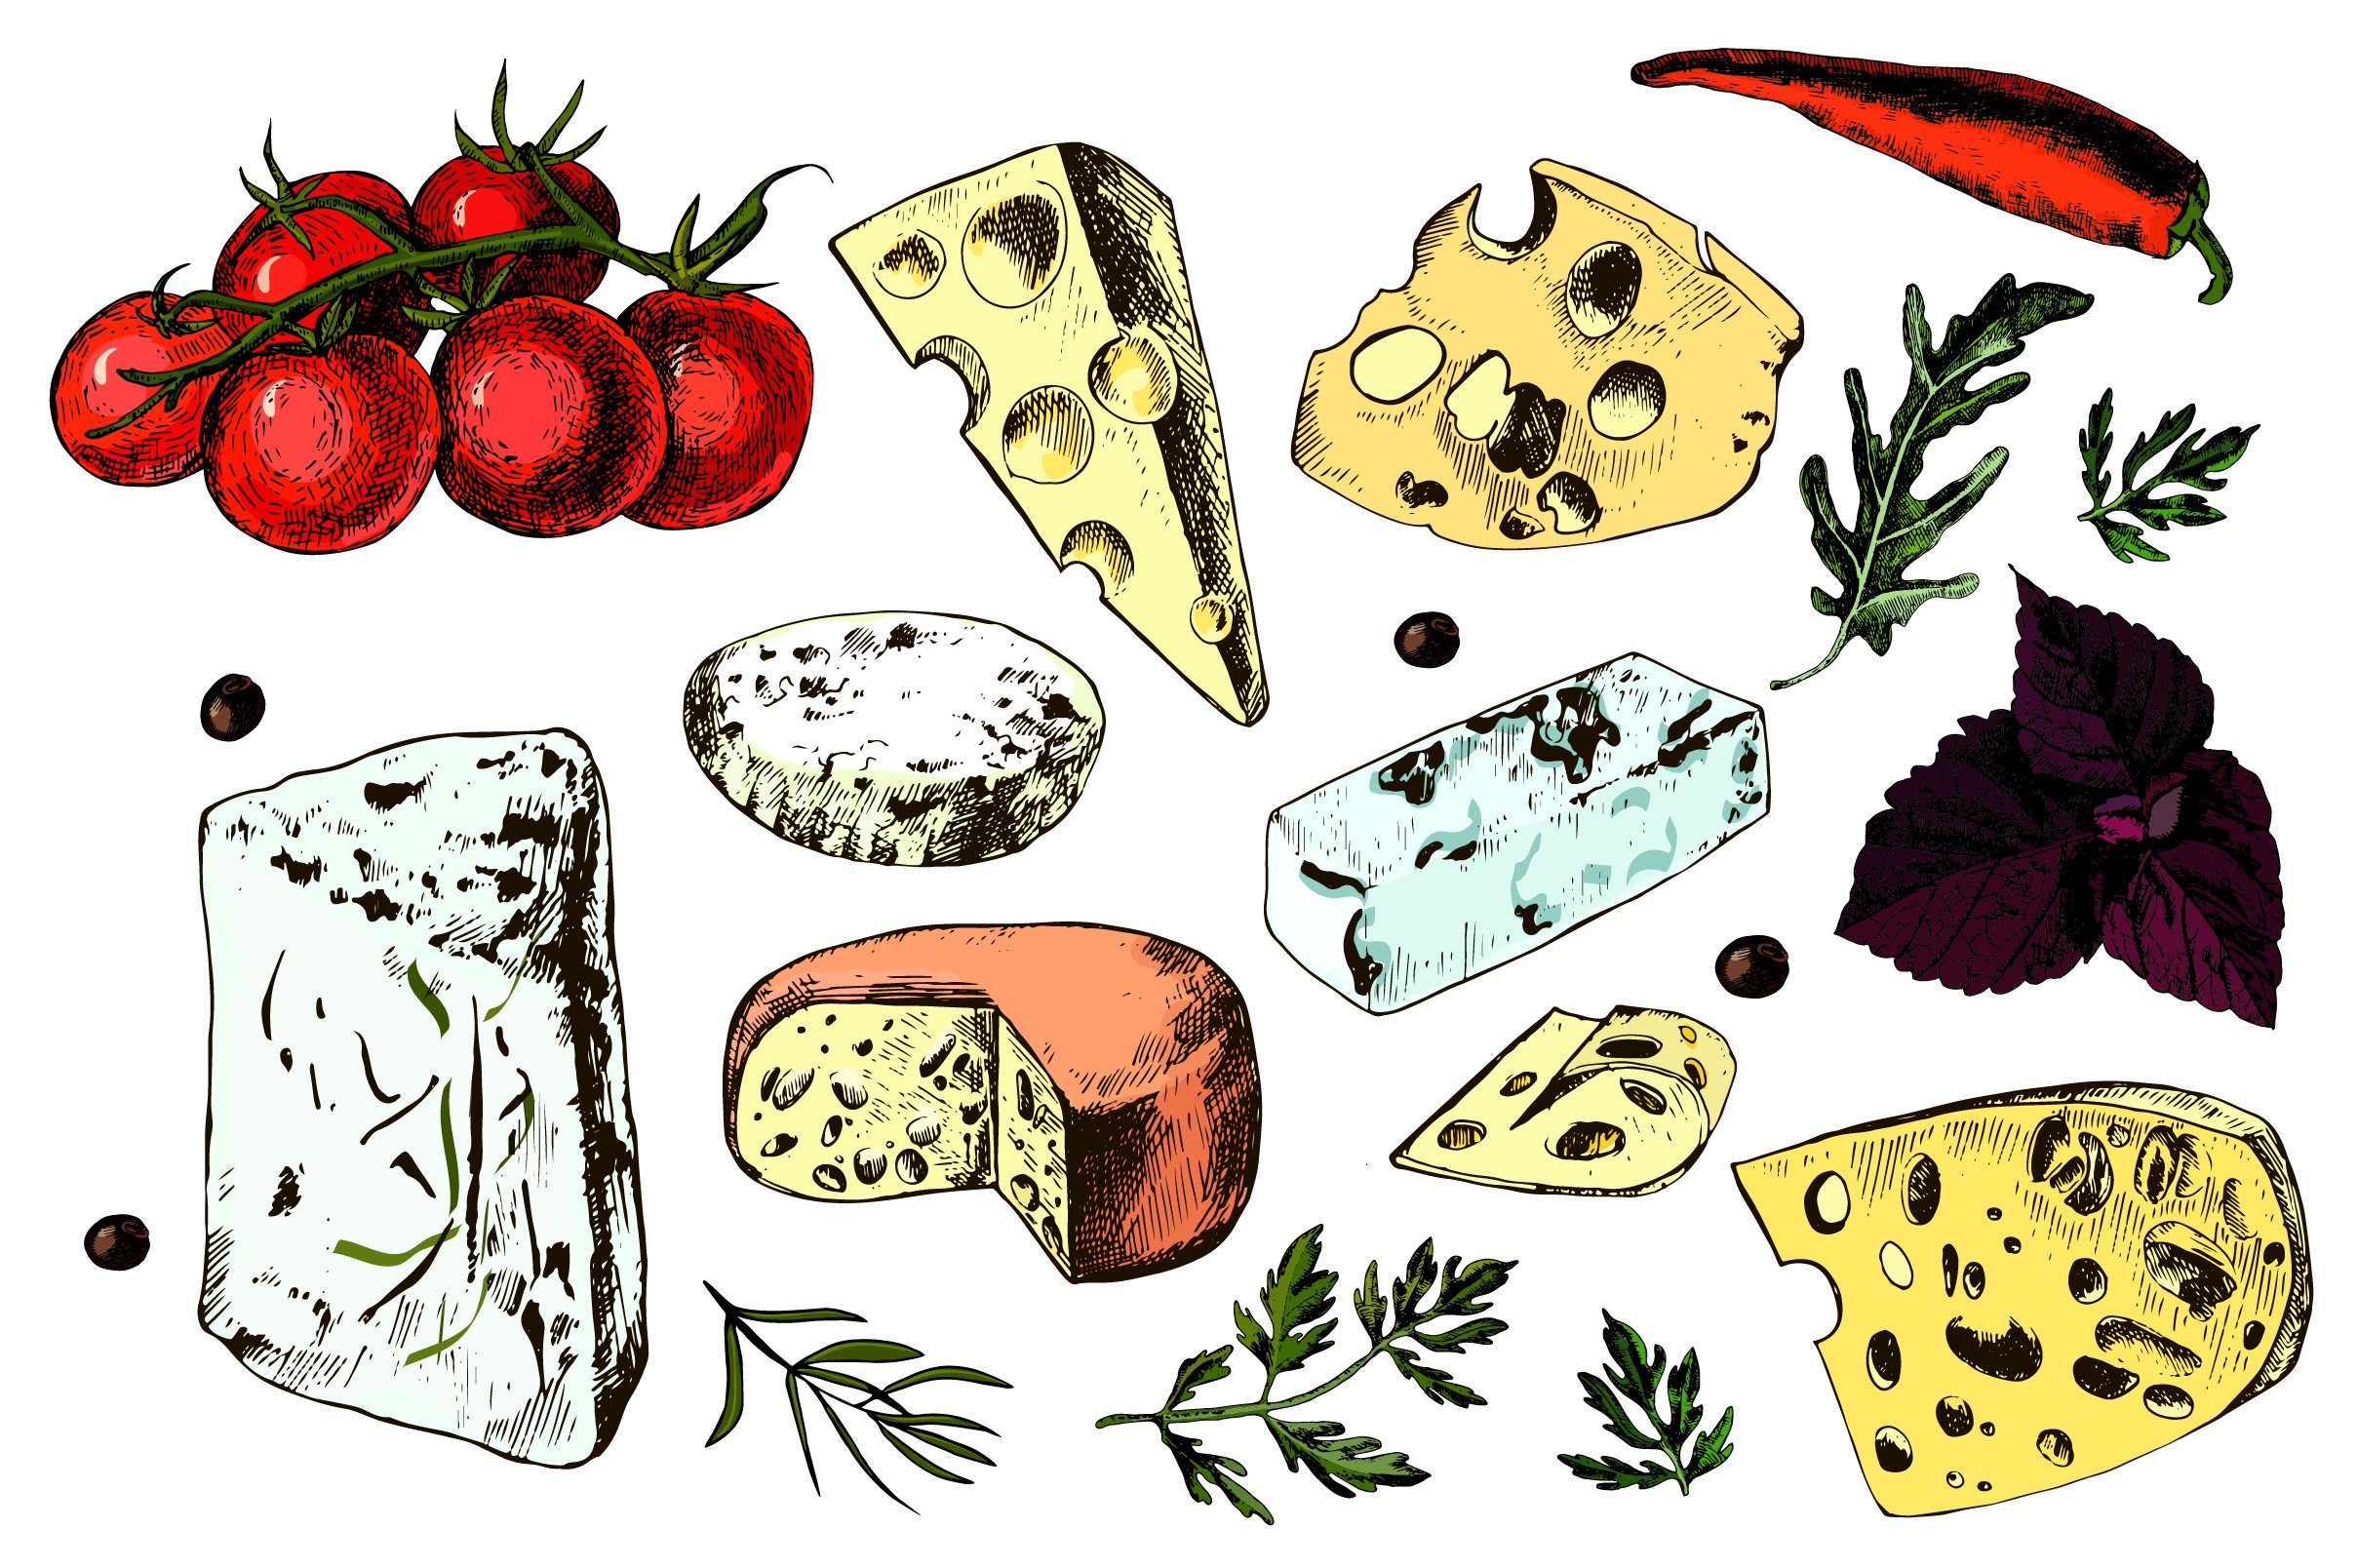 Colorful image of varieties of hard cheese and vegetables drawn in bright colors.